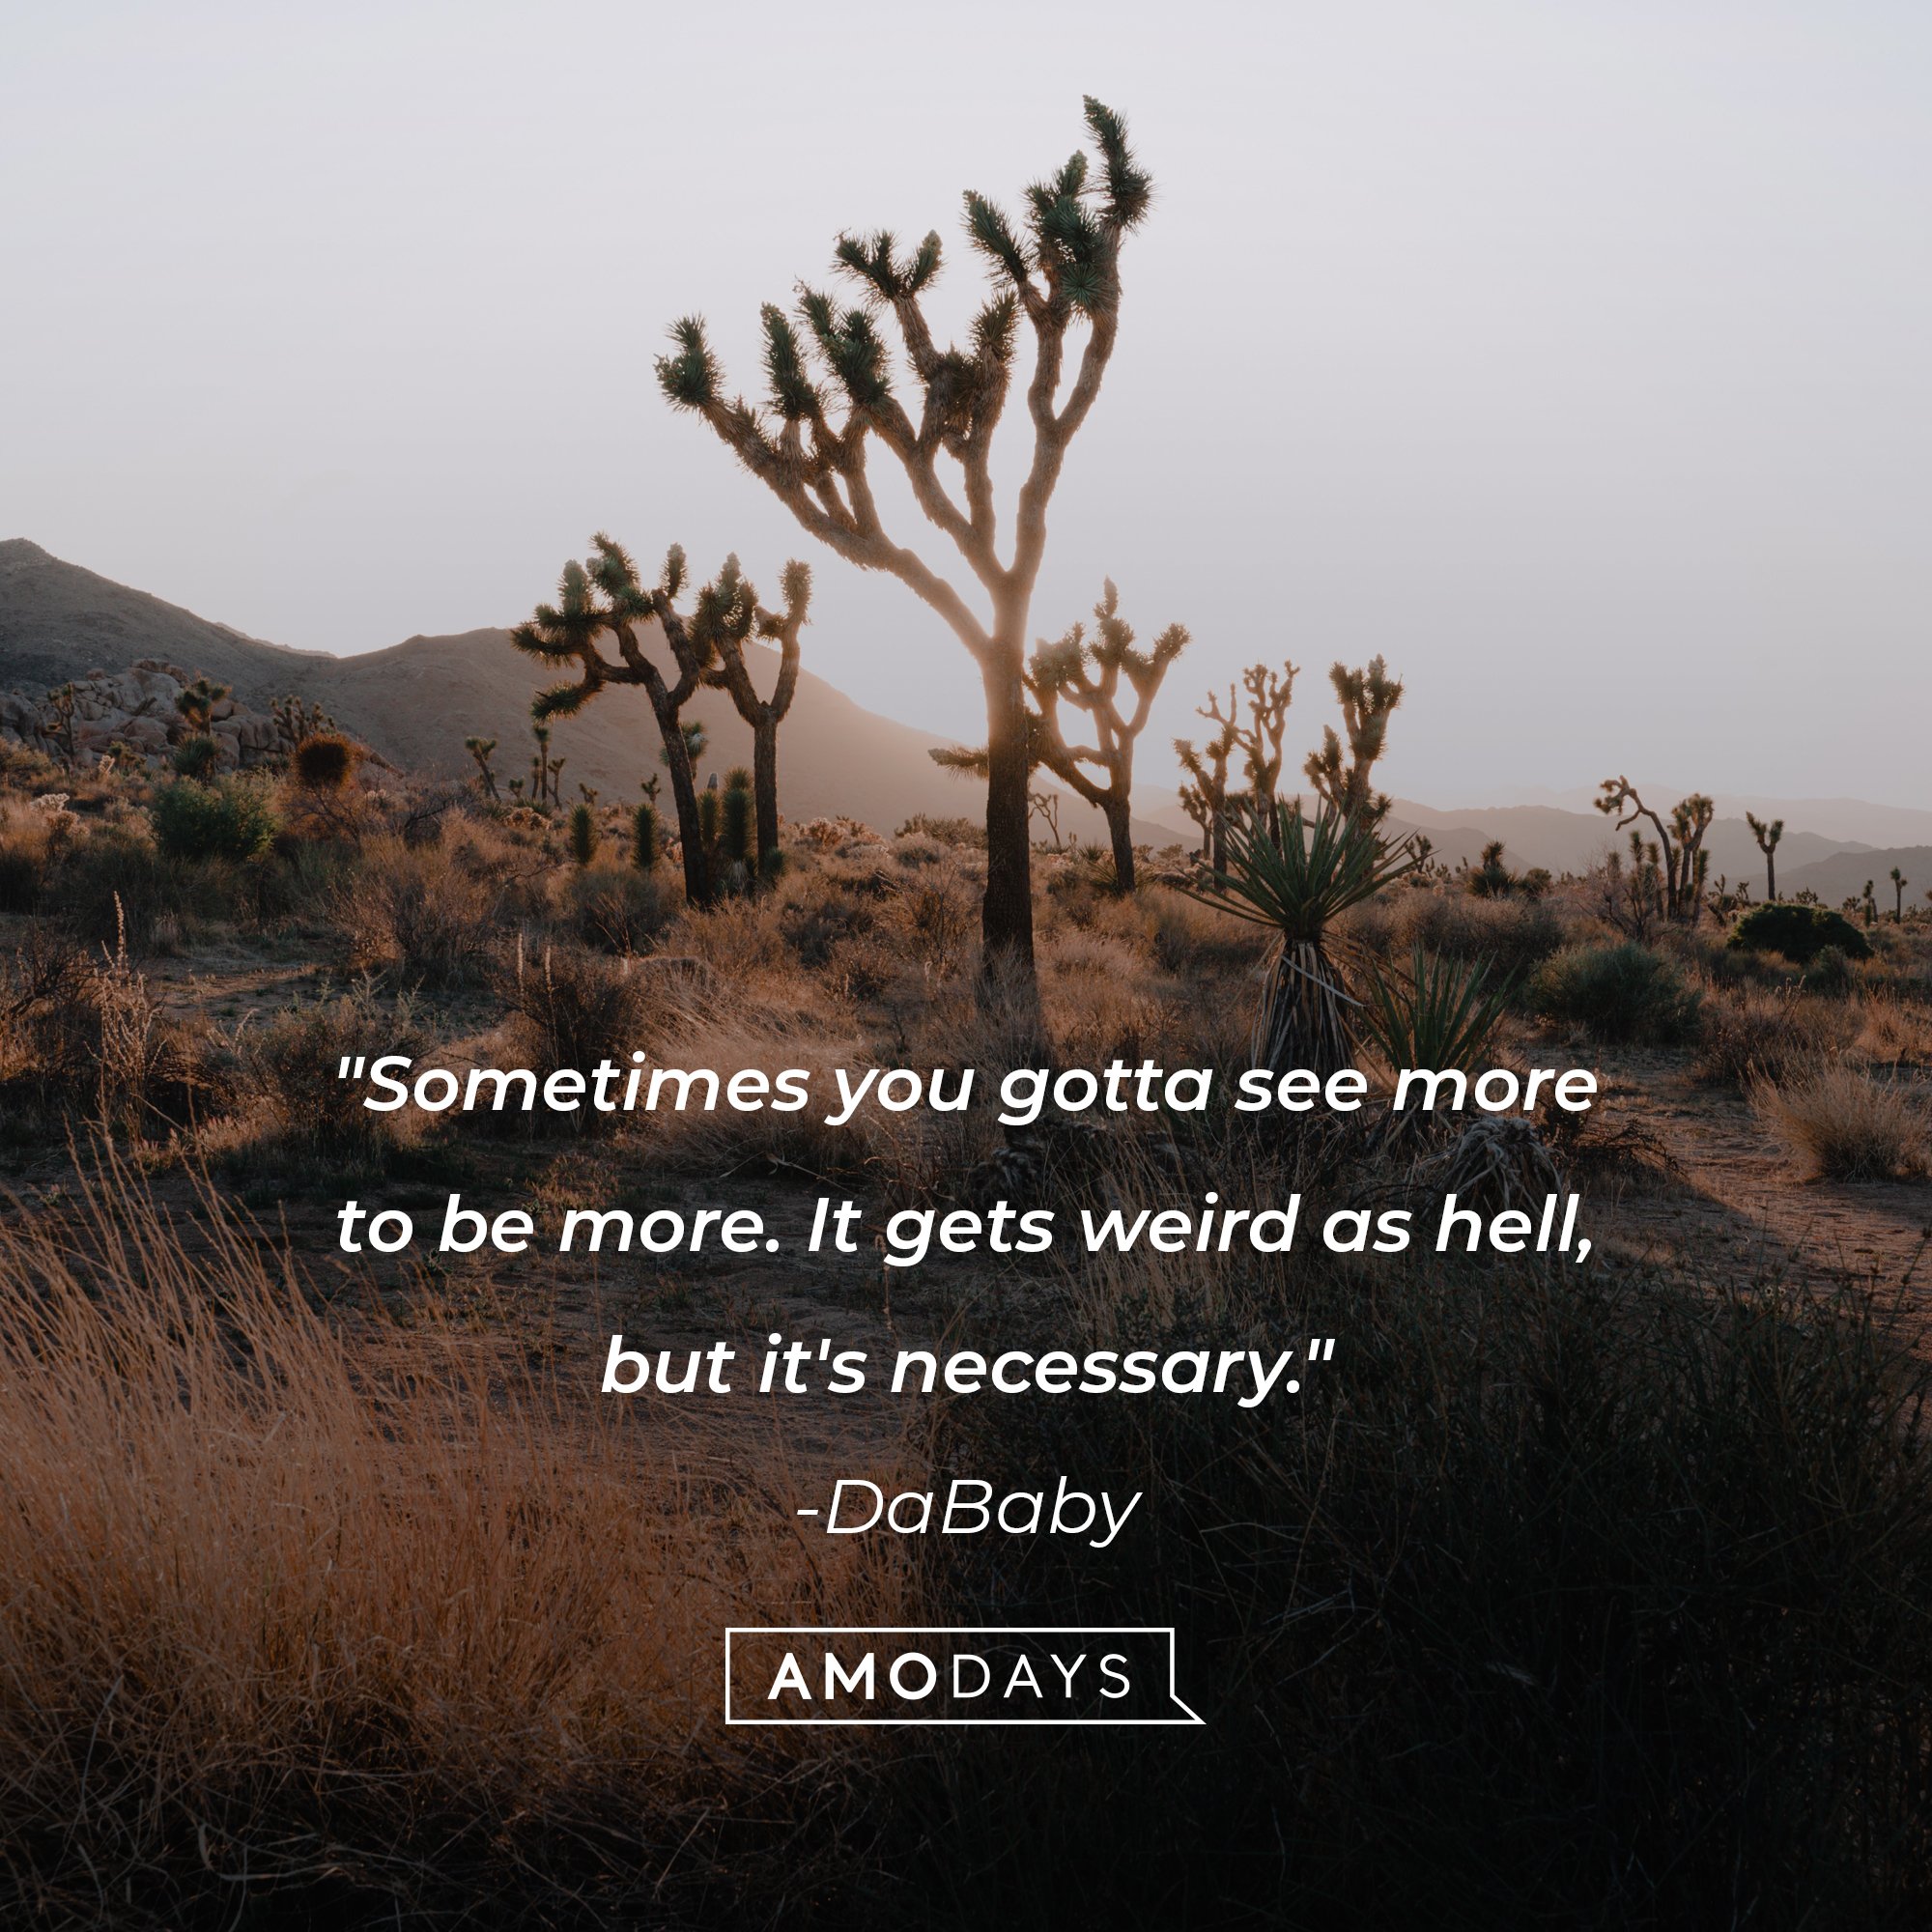 DaBaby‘s quote: "Sometimes you gotta see more to be more. It gets weird as hell, but it's necessary." |  Image: AmoDays